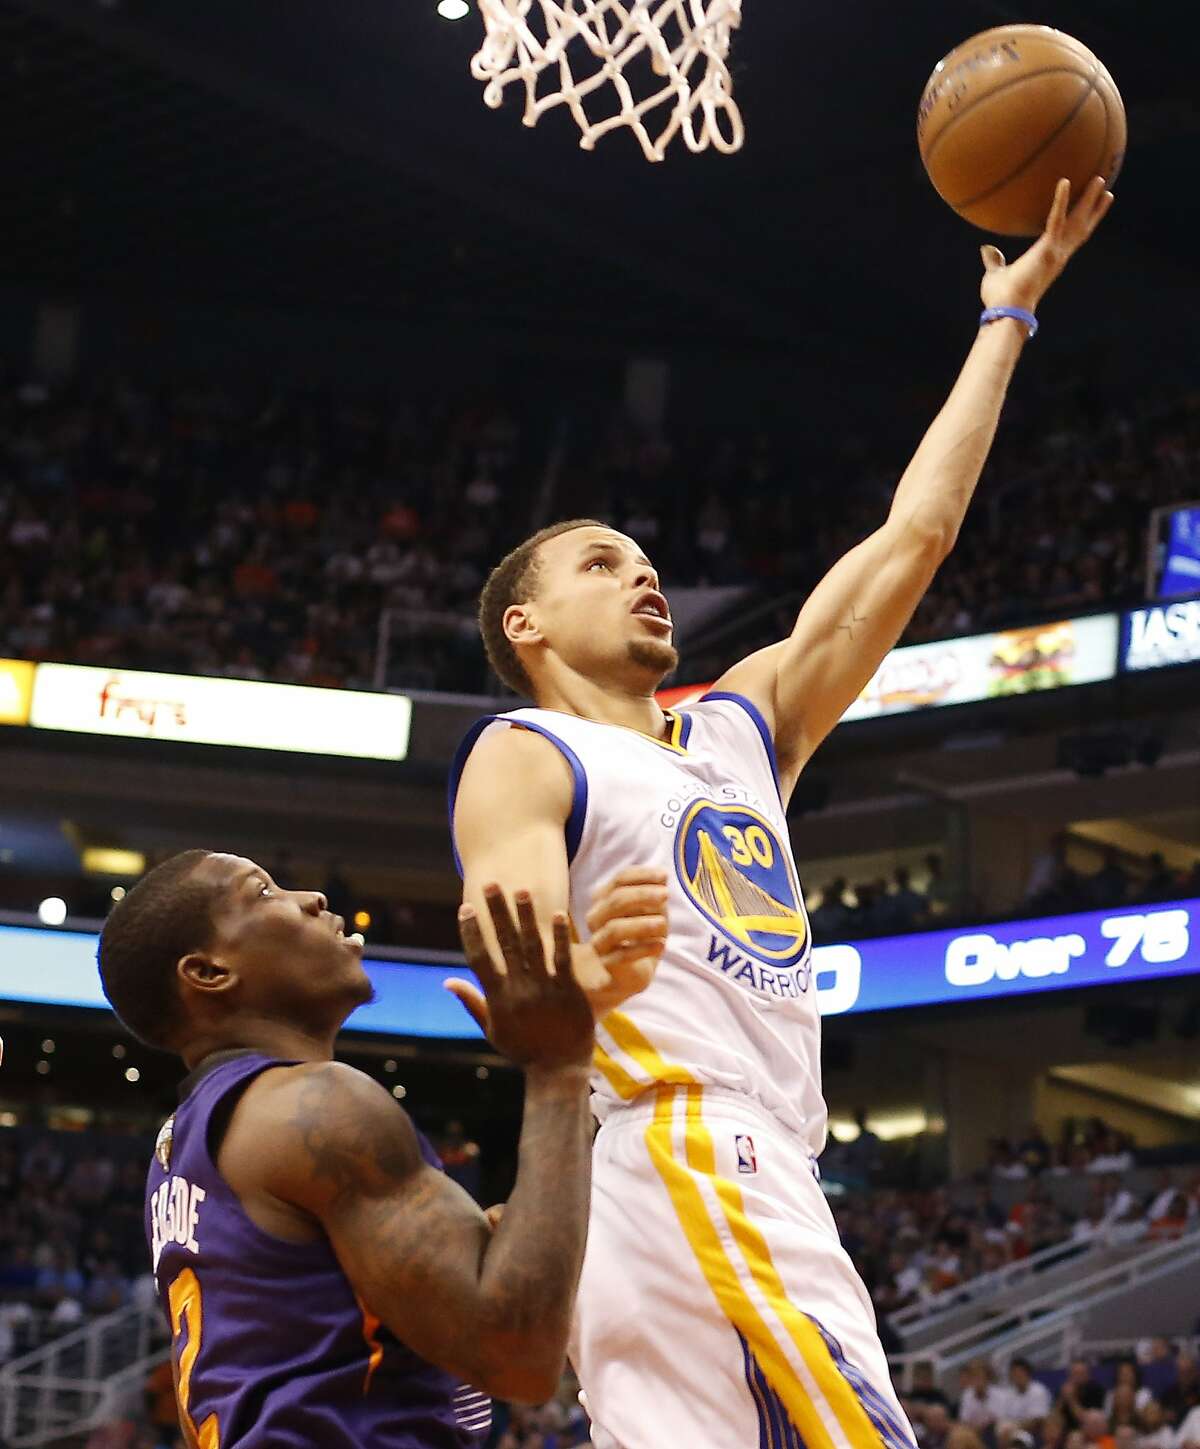 Golden State Warriors guard Stephen Curry (30) shoots over Phoenix Suns guard Eric Bledsoe (2) in the second quarter during an NBA basketball game, Monday, March 9, 2015, in Phoenix. (AP Photo/Rick Scuteri)